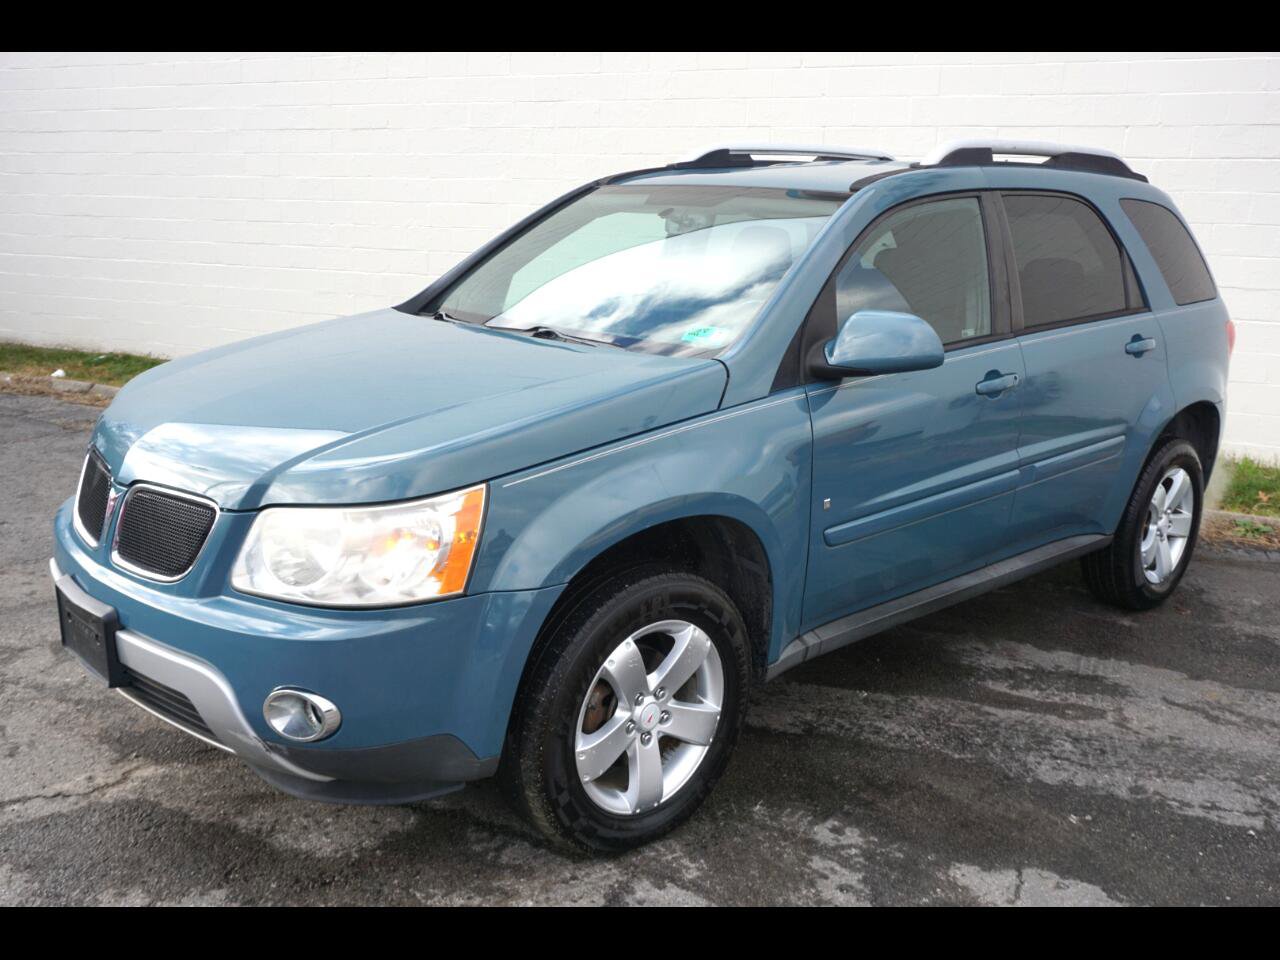 Pontiac Torrent for Sale in London, KY (Test Drive at Home) - Kelley Blue  Book